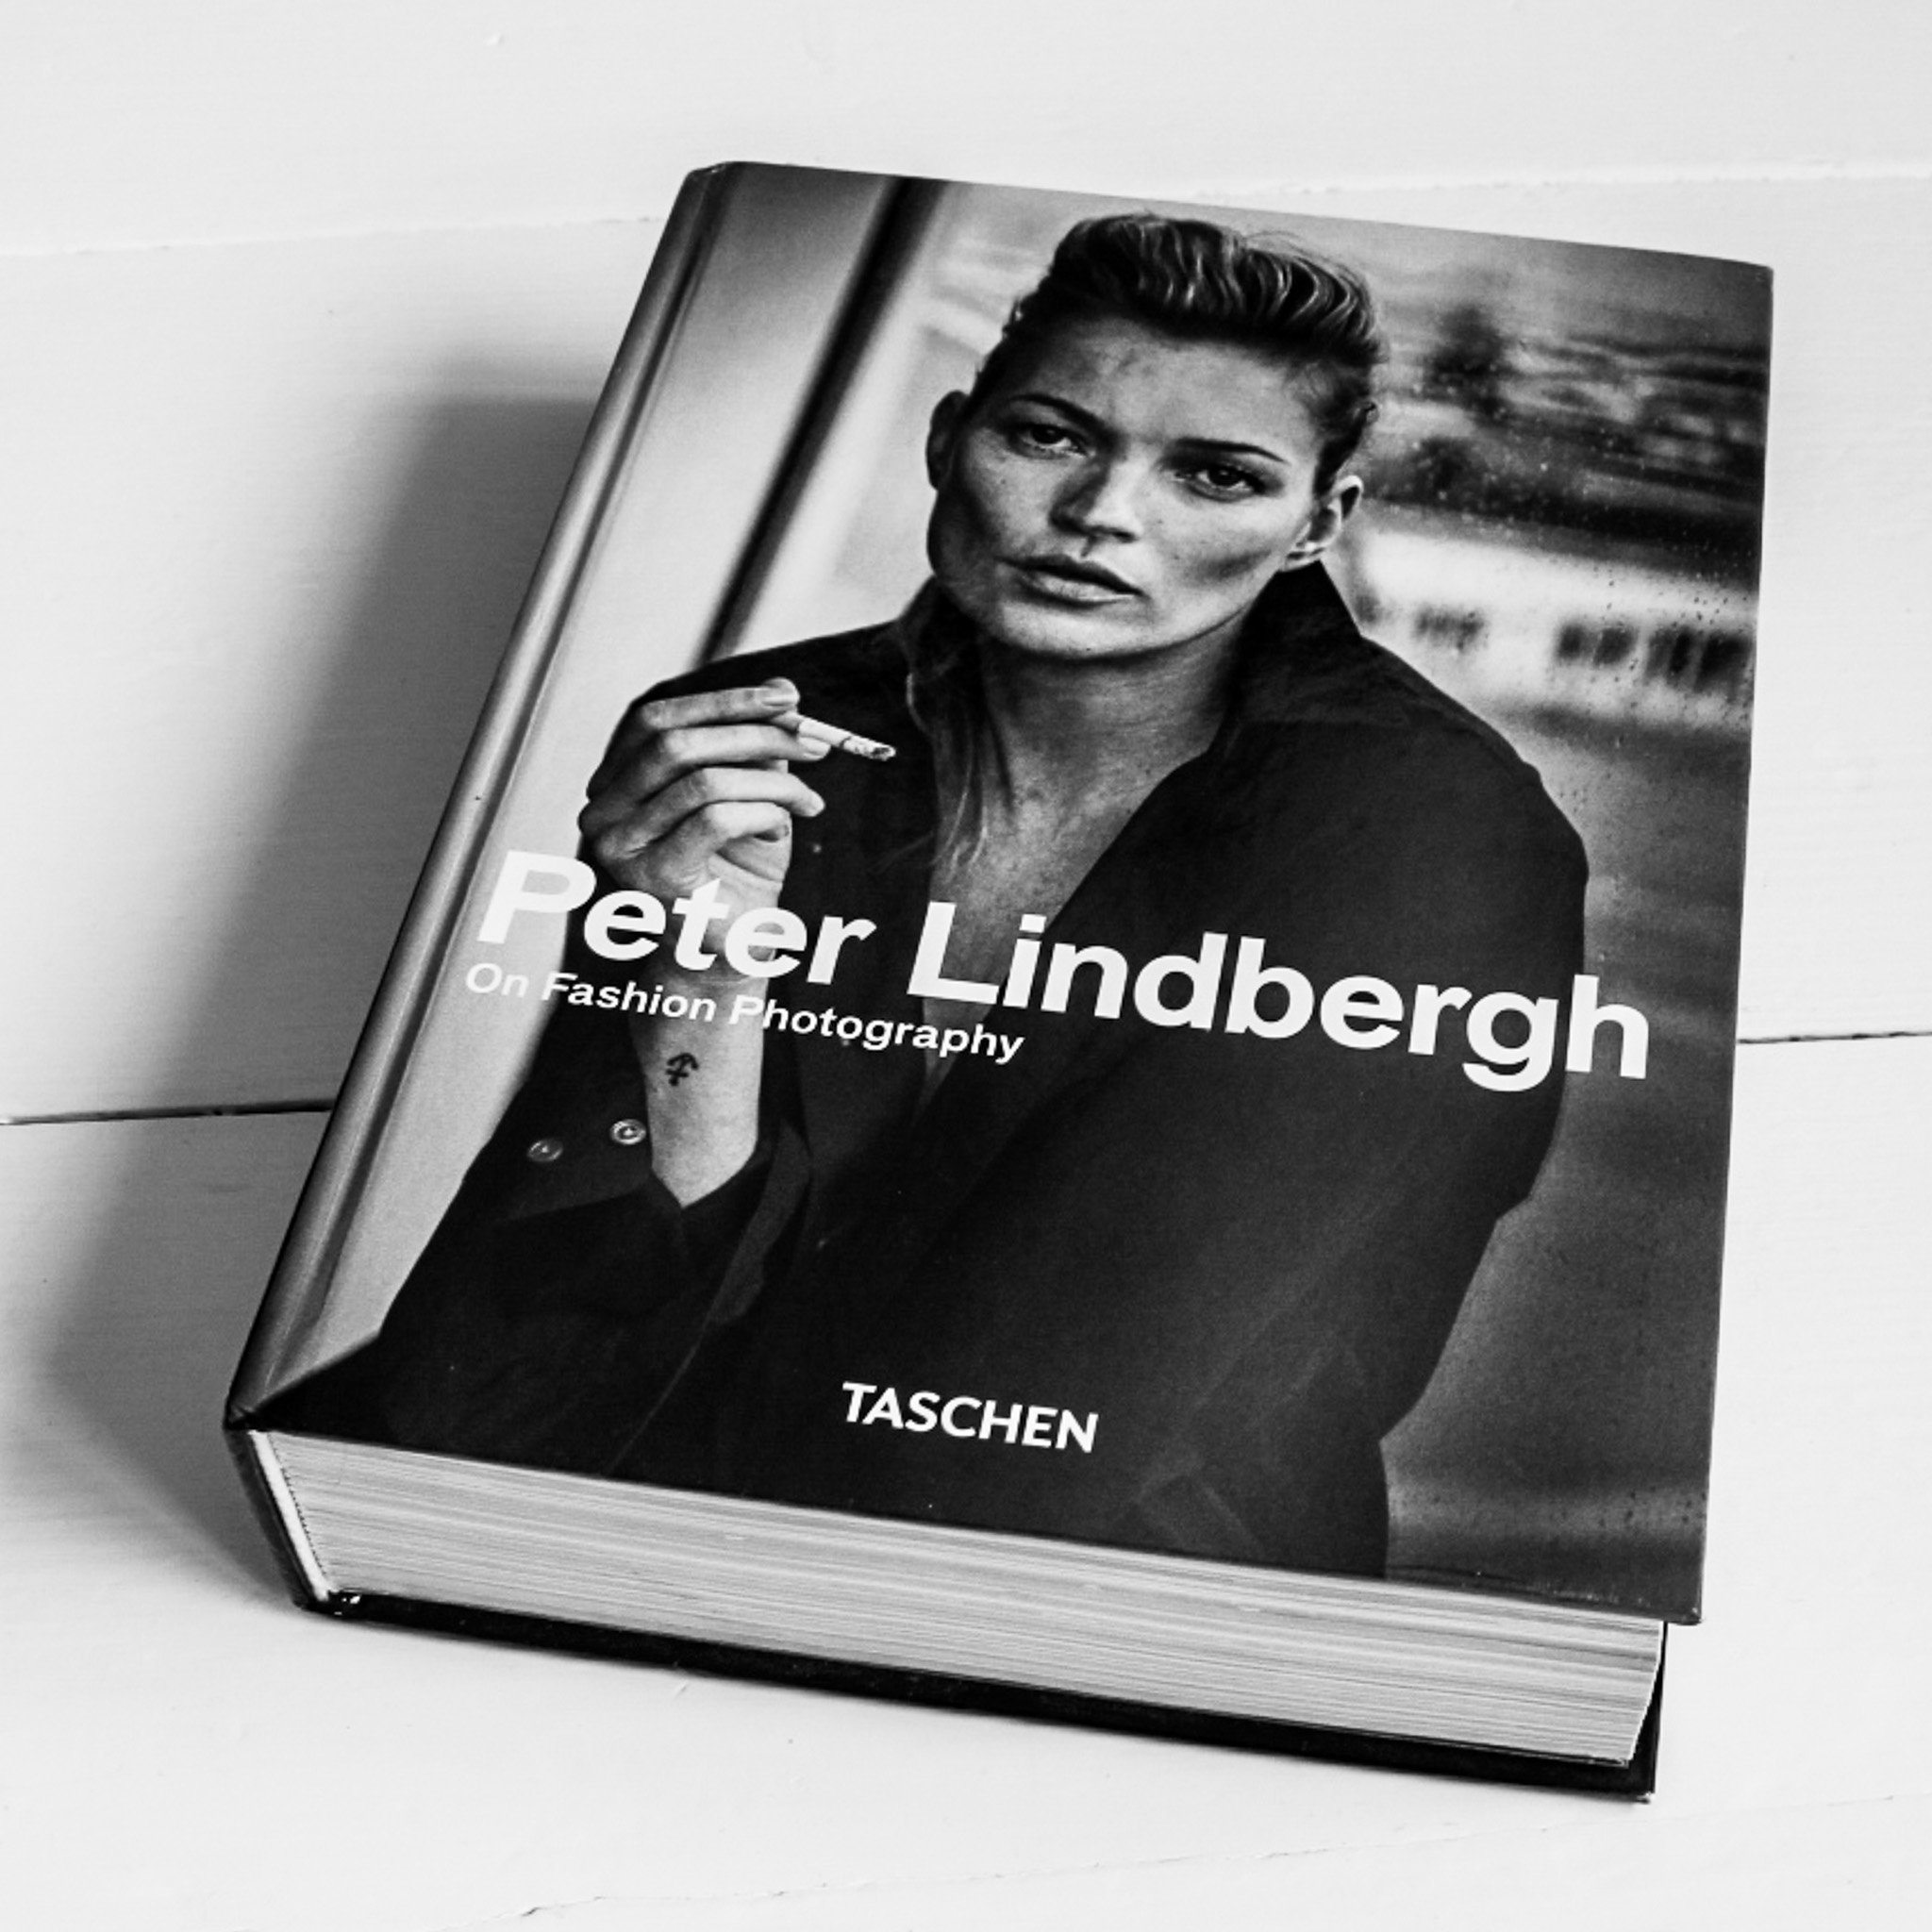 Taschen Peter Lindbergh - On fashion photography